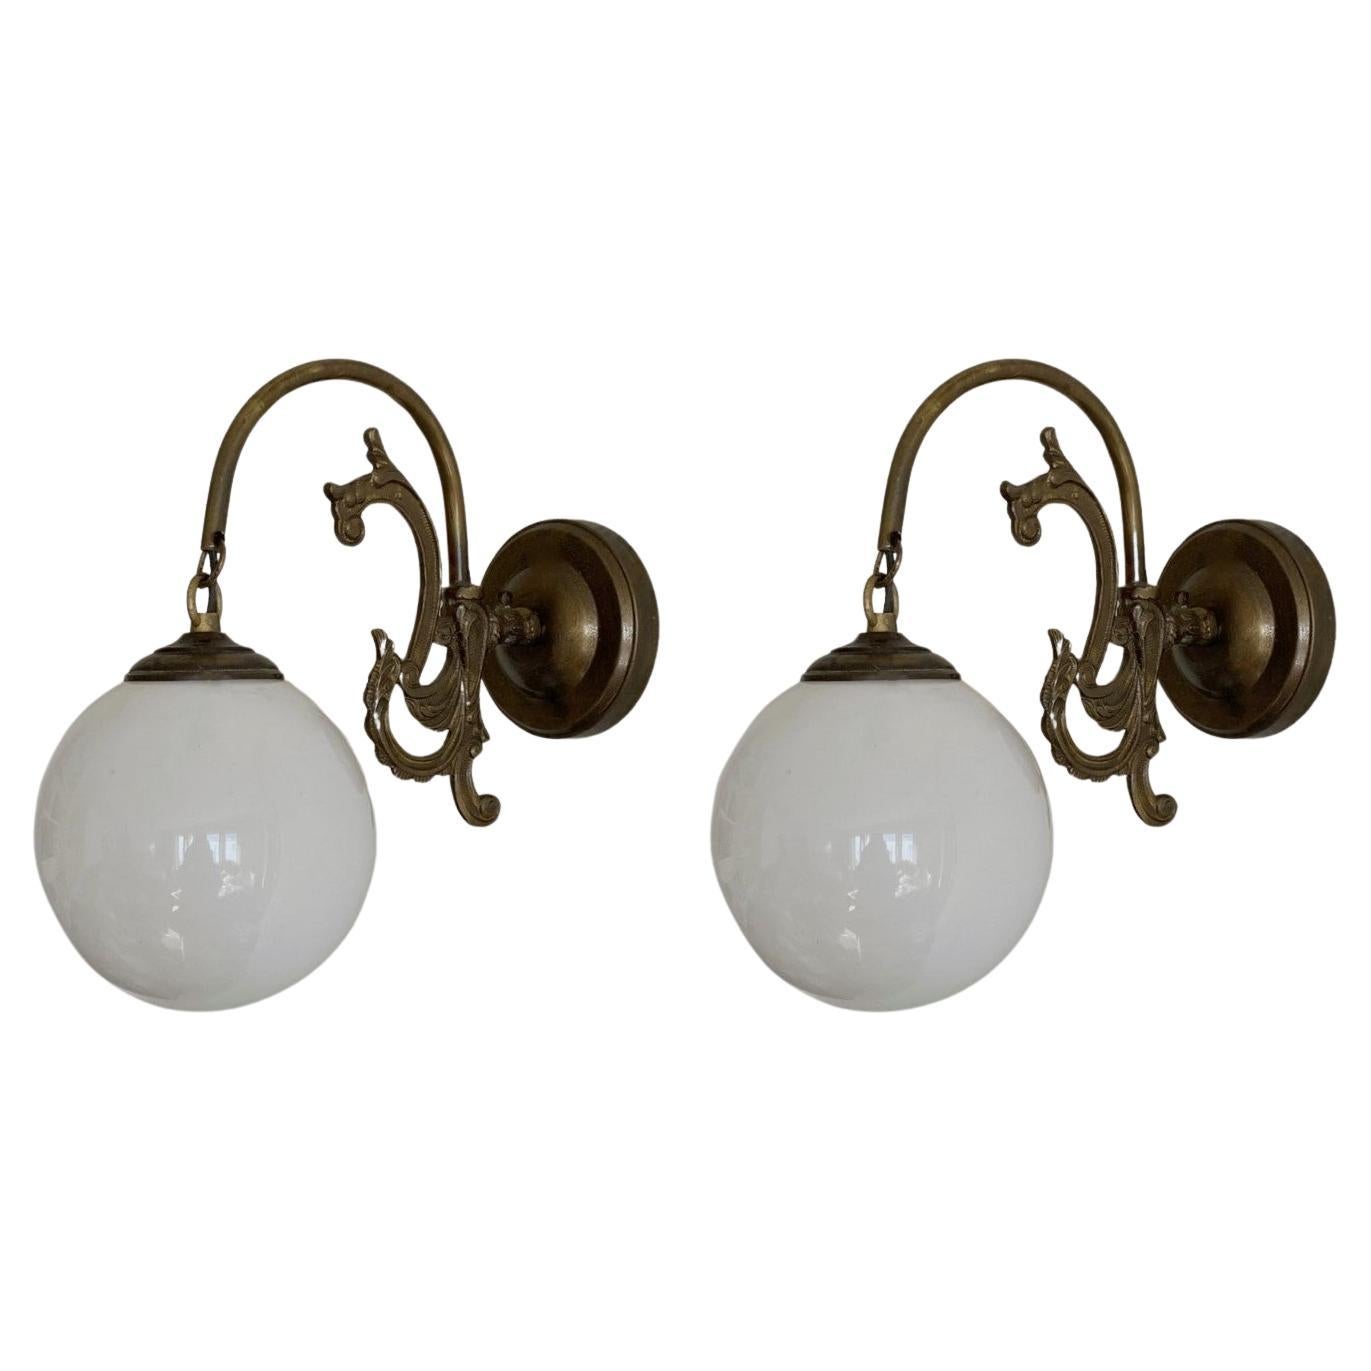 Six bronzed brass wall lights with hand-blown opaline glass globes, for indoor or covered outdoor use, France, 1930-1939. All six wall sconces are in very good condition, beautiful patina, no ships or cracks, rewired. Each sconce takes one Edison